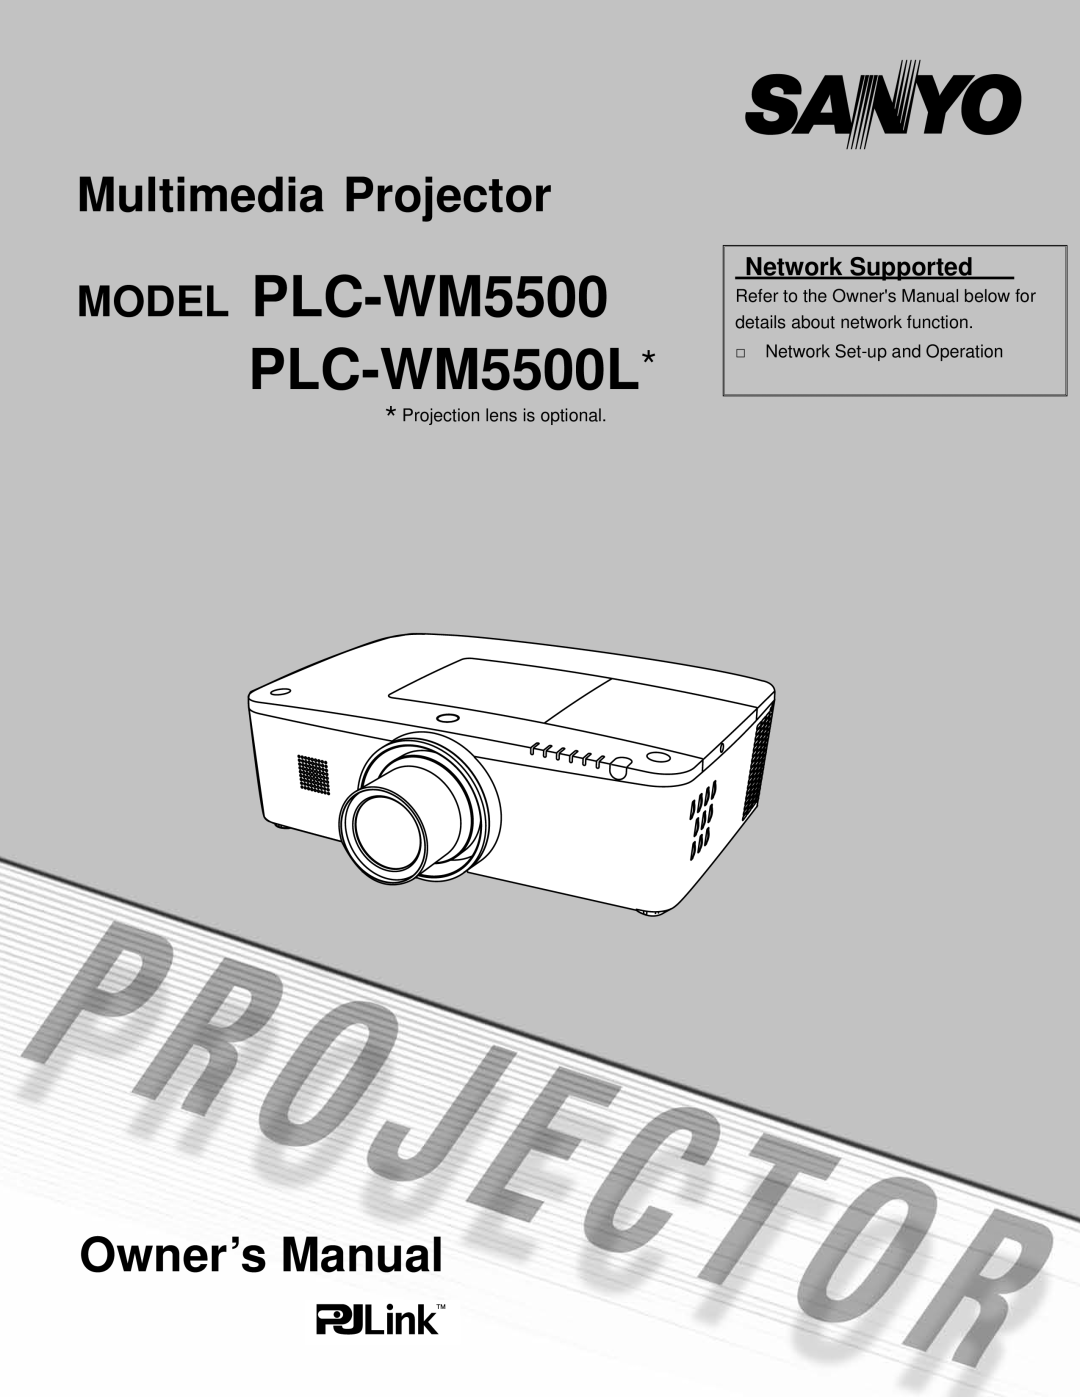 Sanyo owner manual Network Supported, MODEL PLC-WM5500 PLC-WM5500L, Multimedia Projector, Owner’s Manual 